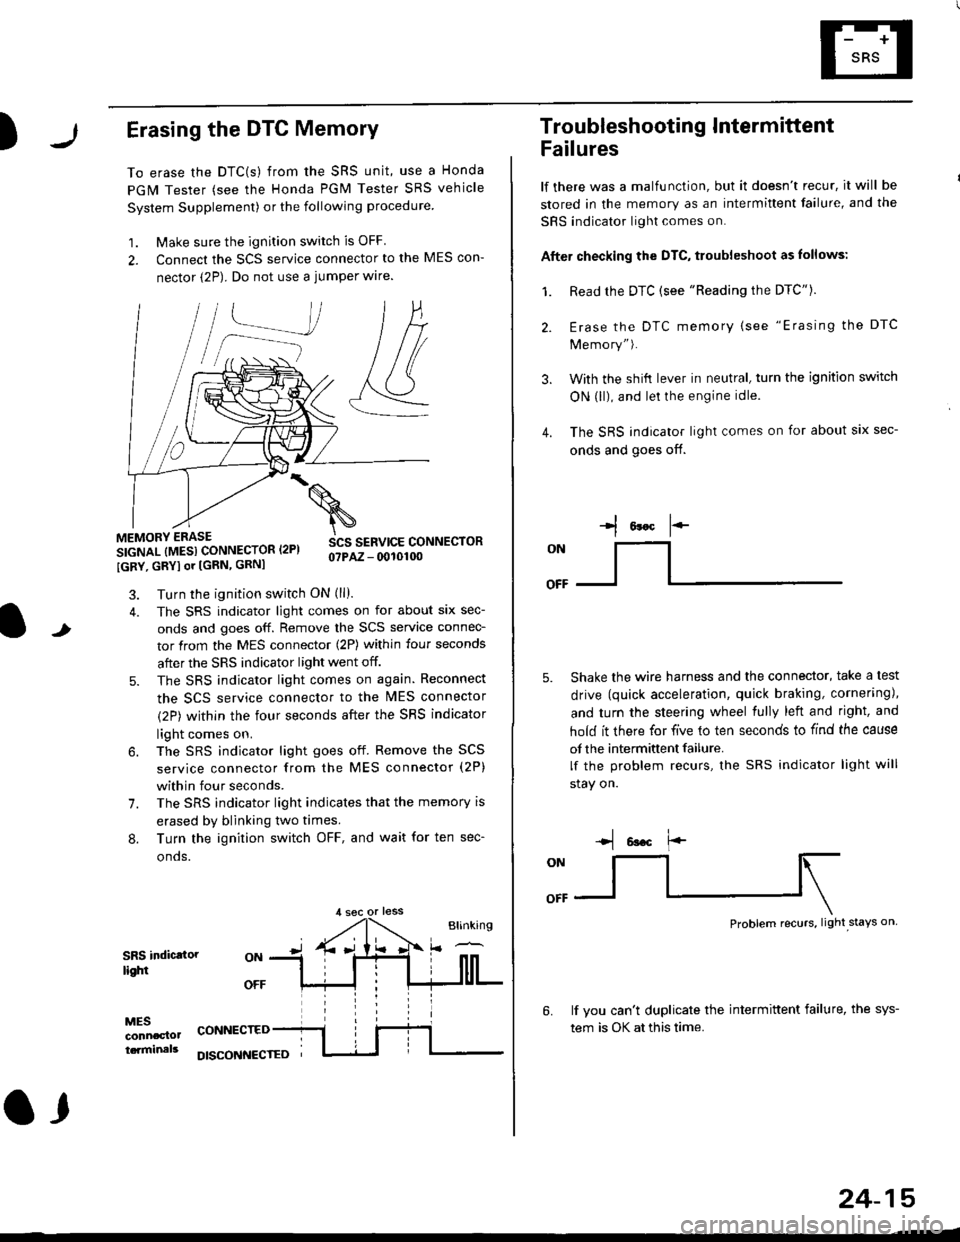 HONDA CIVIC 1997 6.G Workshop Manual )Erasing the DTC Memory
To erase the DTC(s) from the SRS unit, use a Honda
PGM Tester (see the Honda PGM Tester SRS vehicle
System Supplement) or the following procedure
1. Make sure the ignition swit